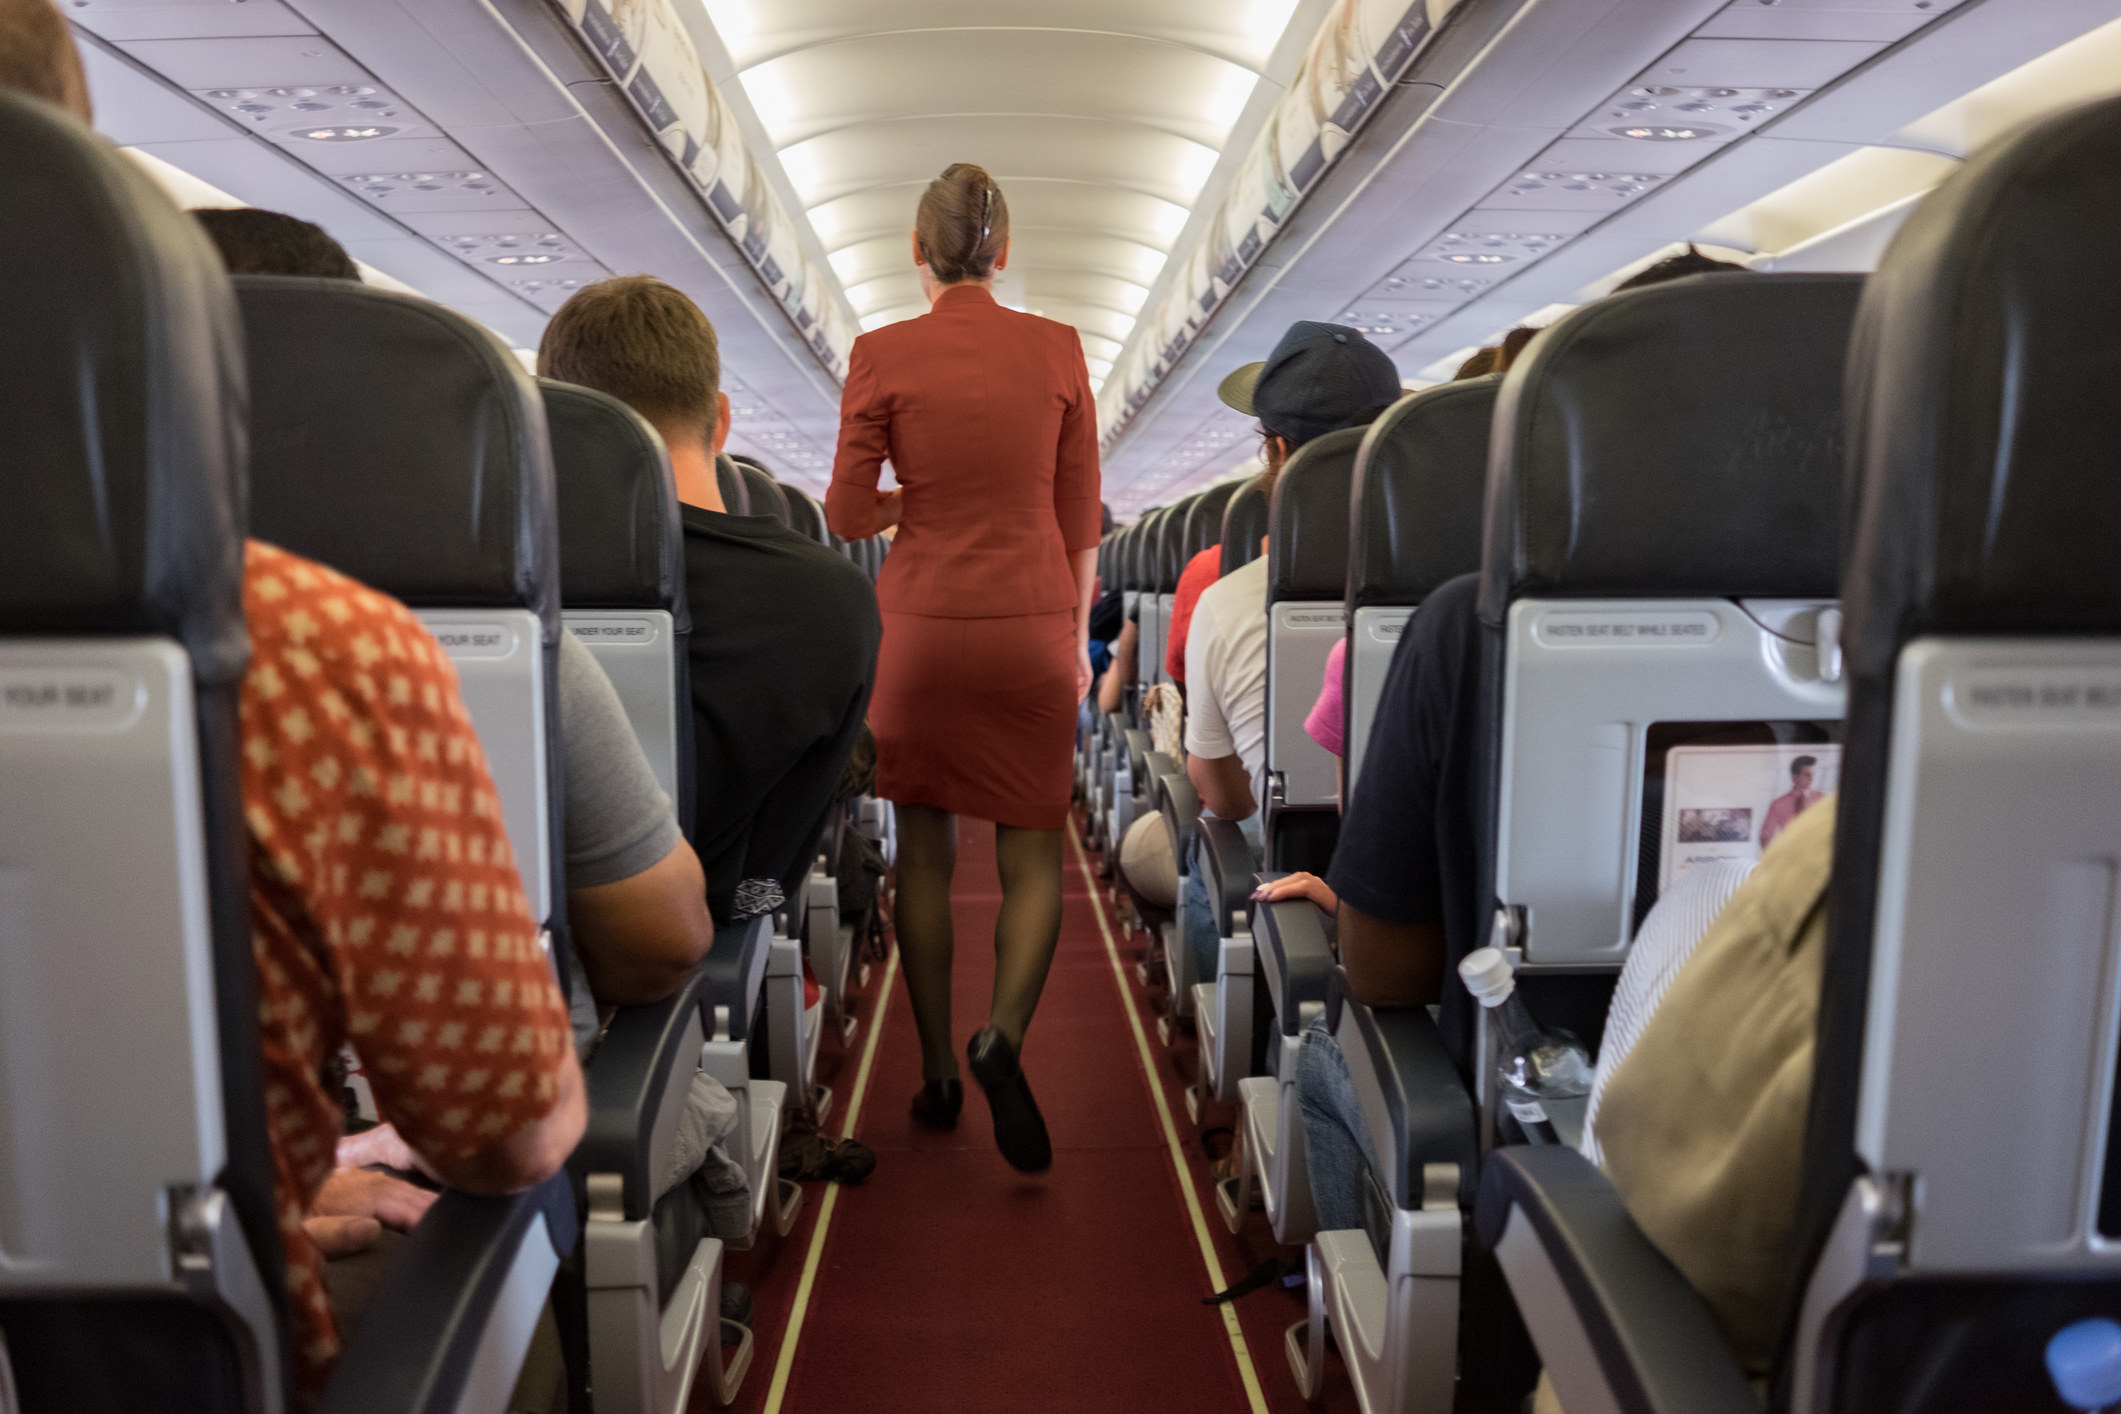 A flight attendant in the aisle of a plane